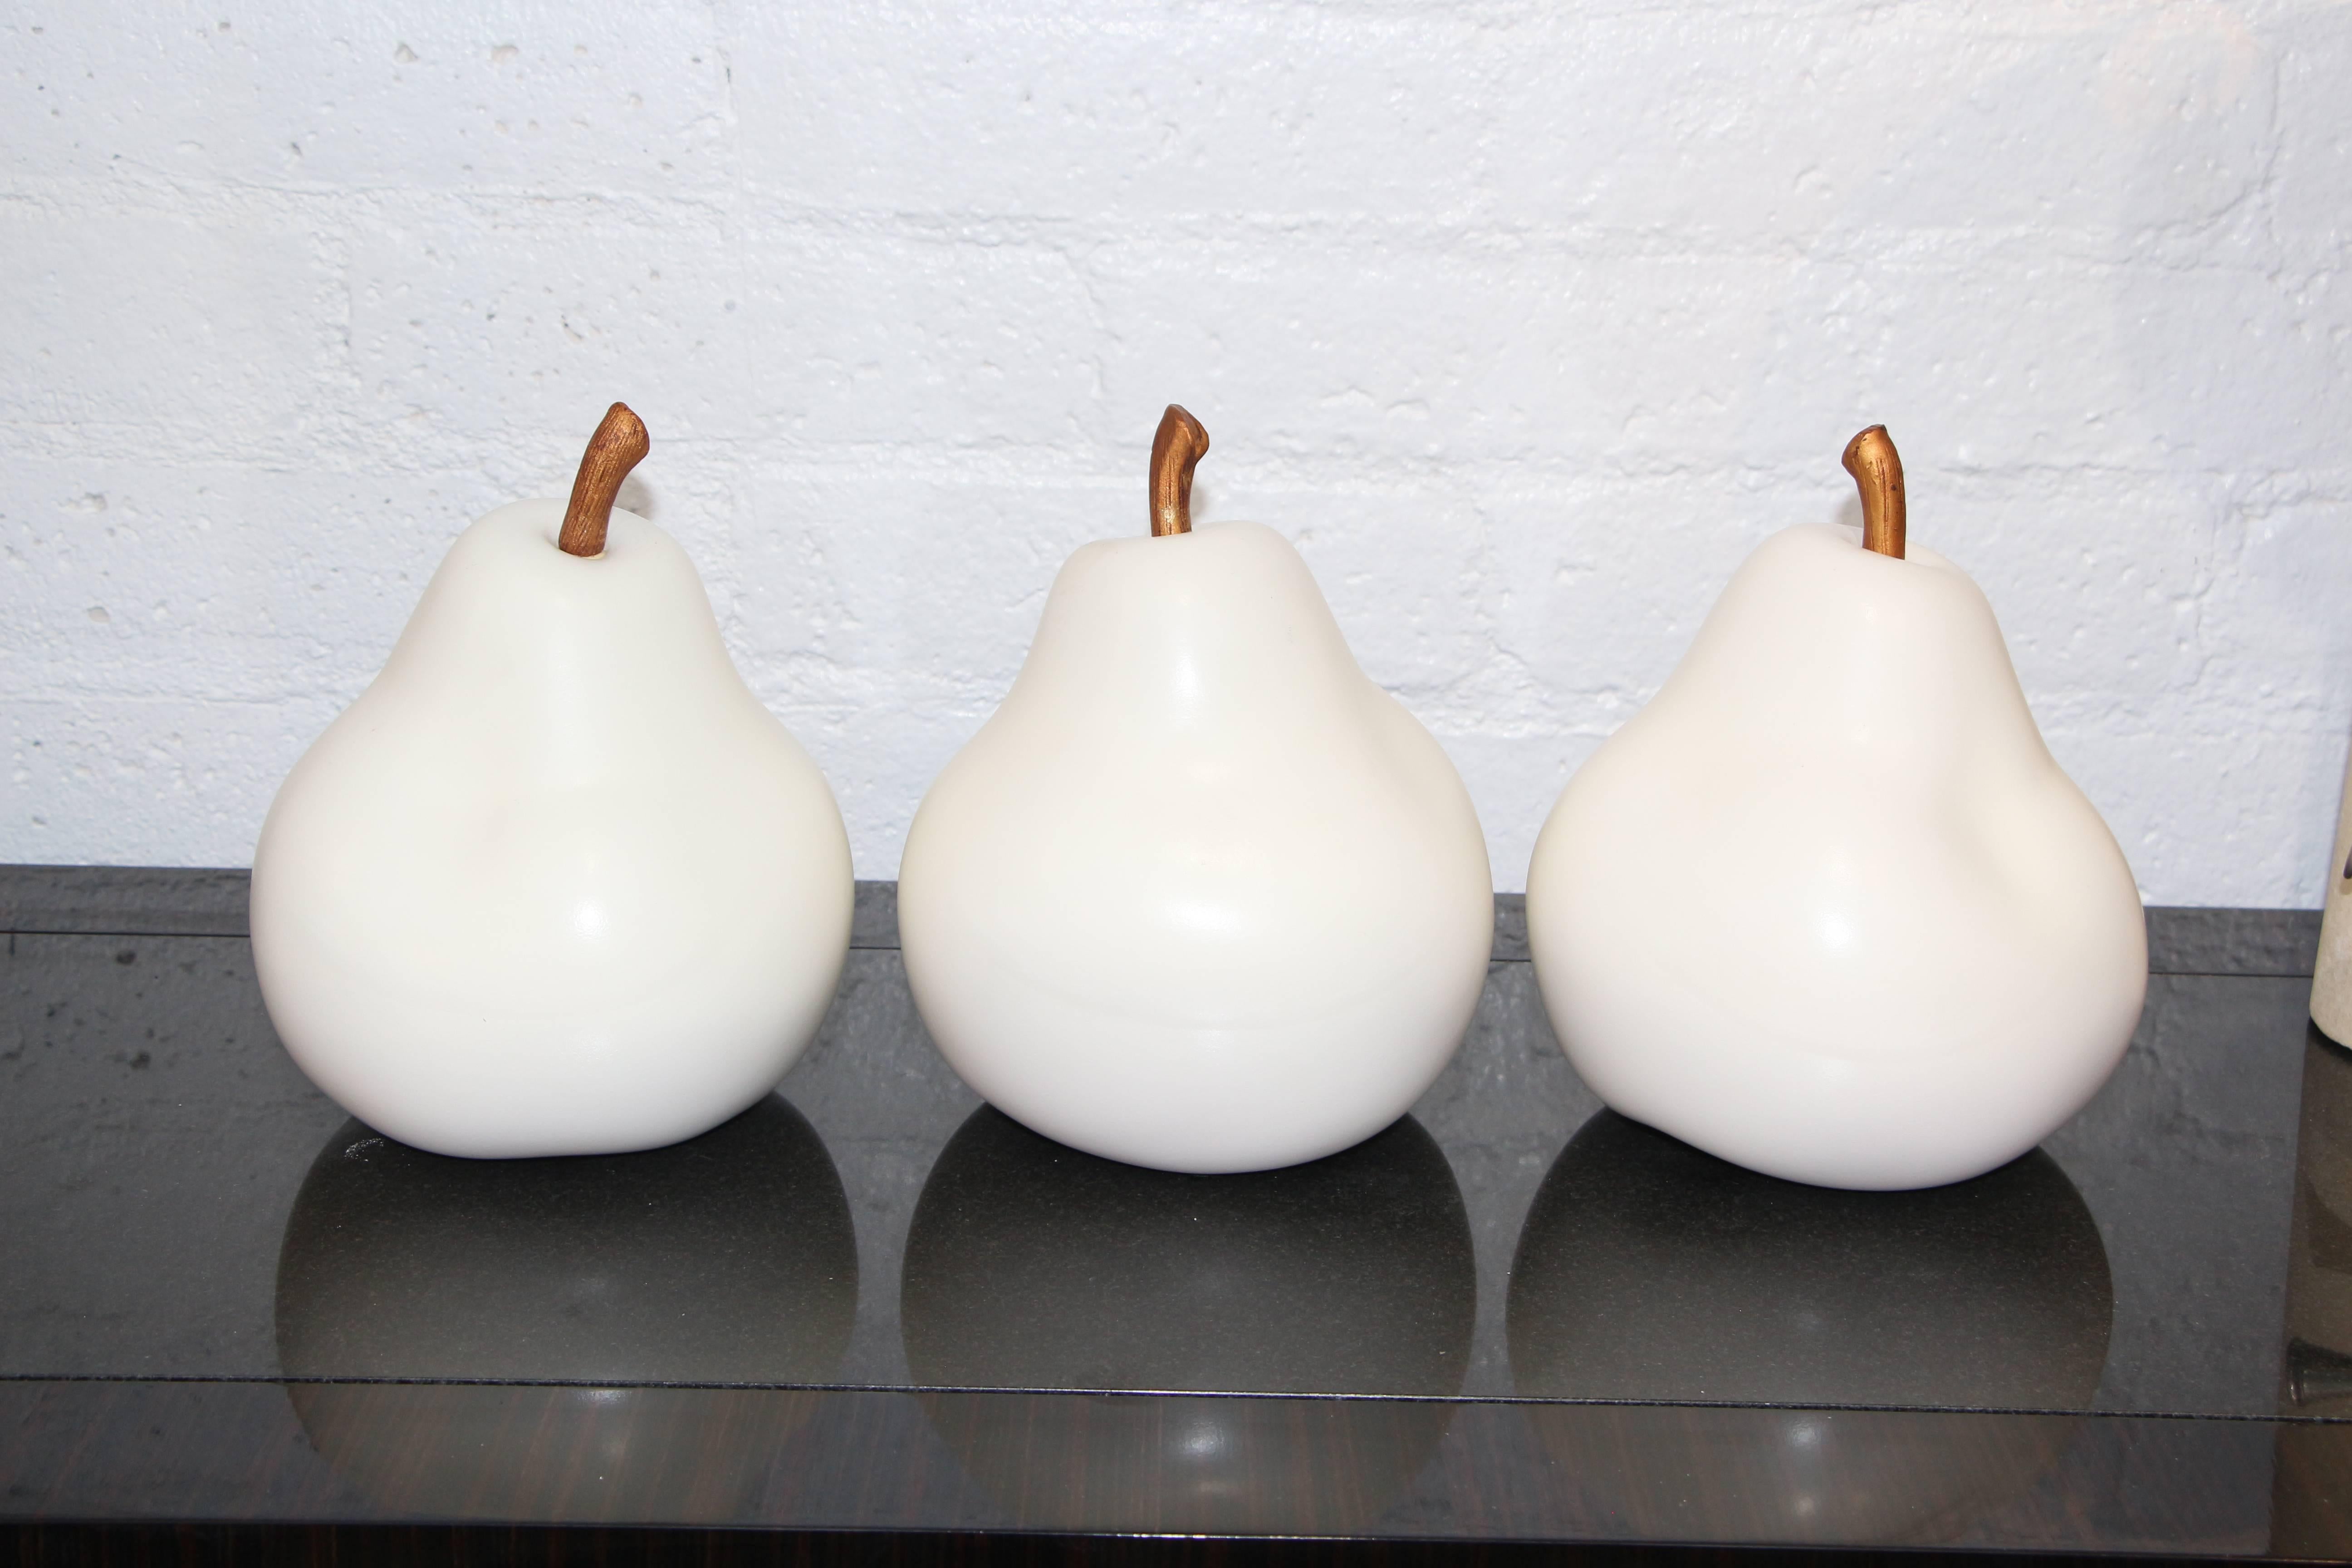 Unknown Three Great Ceramic Pears with Stems